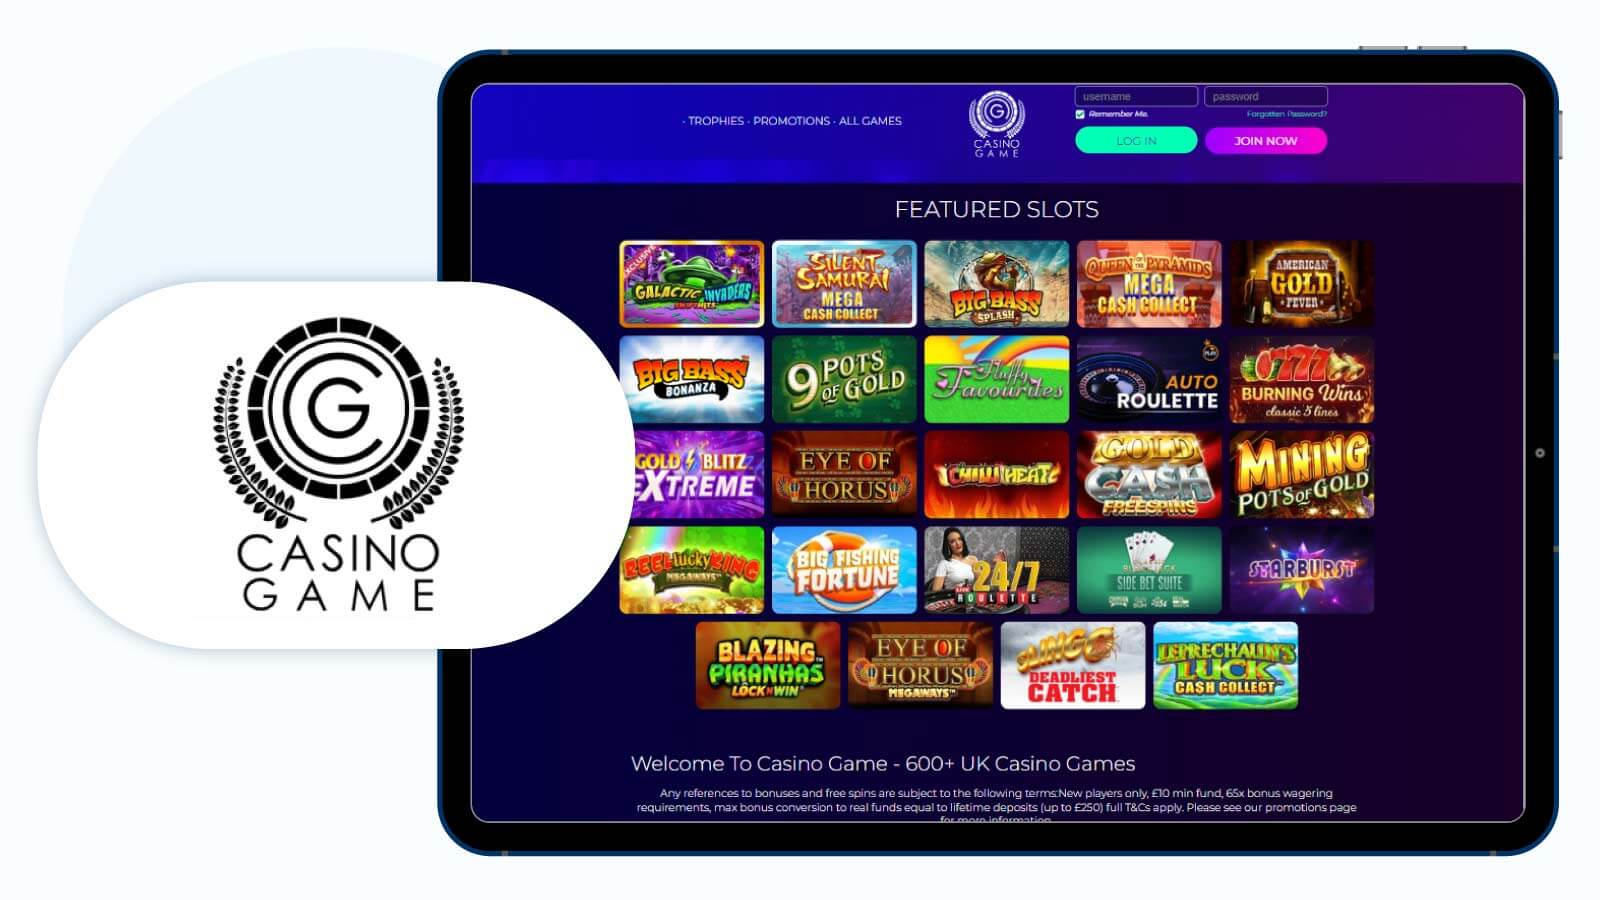 Casino-Game-Top-RTG-Casino-Where-You-Spin-the-Mega-Wheel-for-Top-Offers